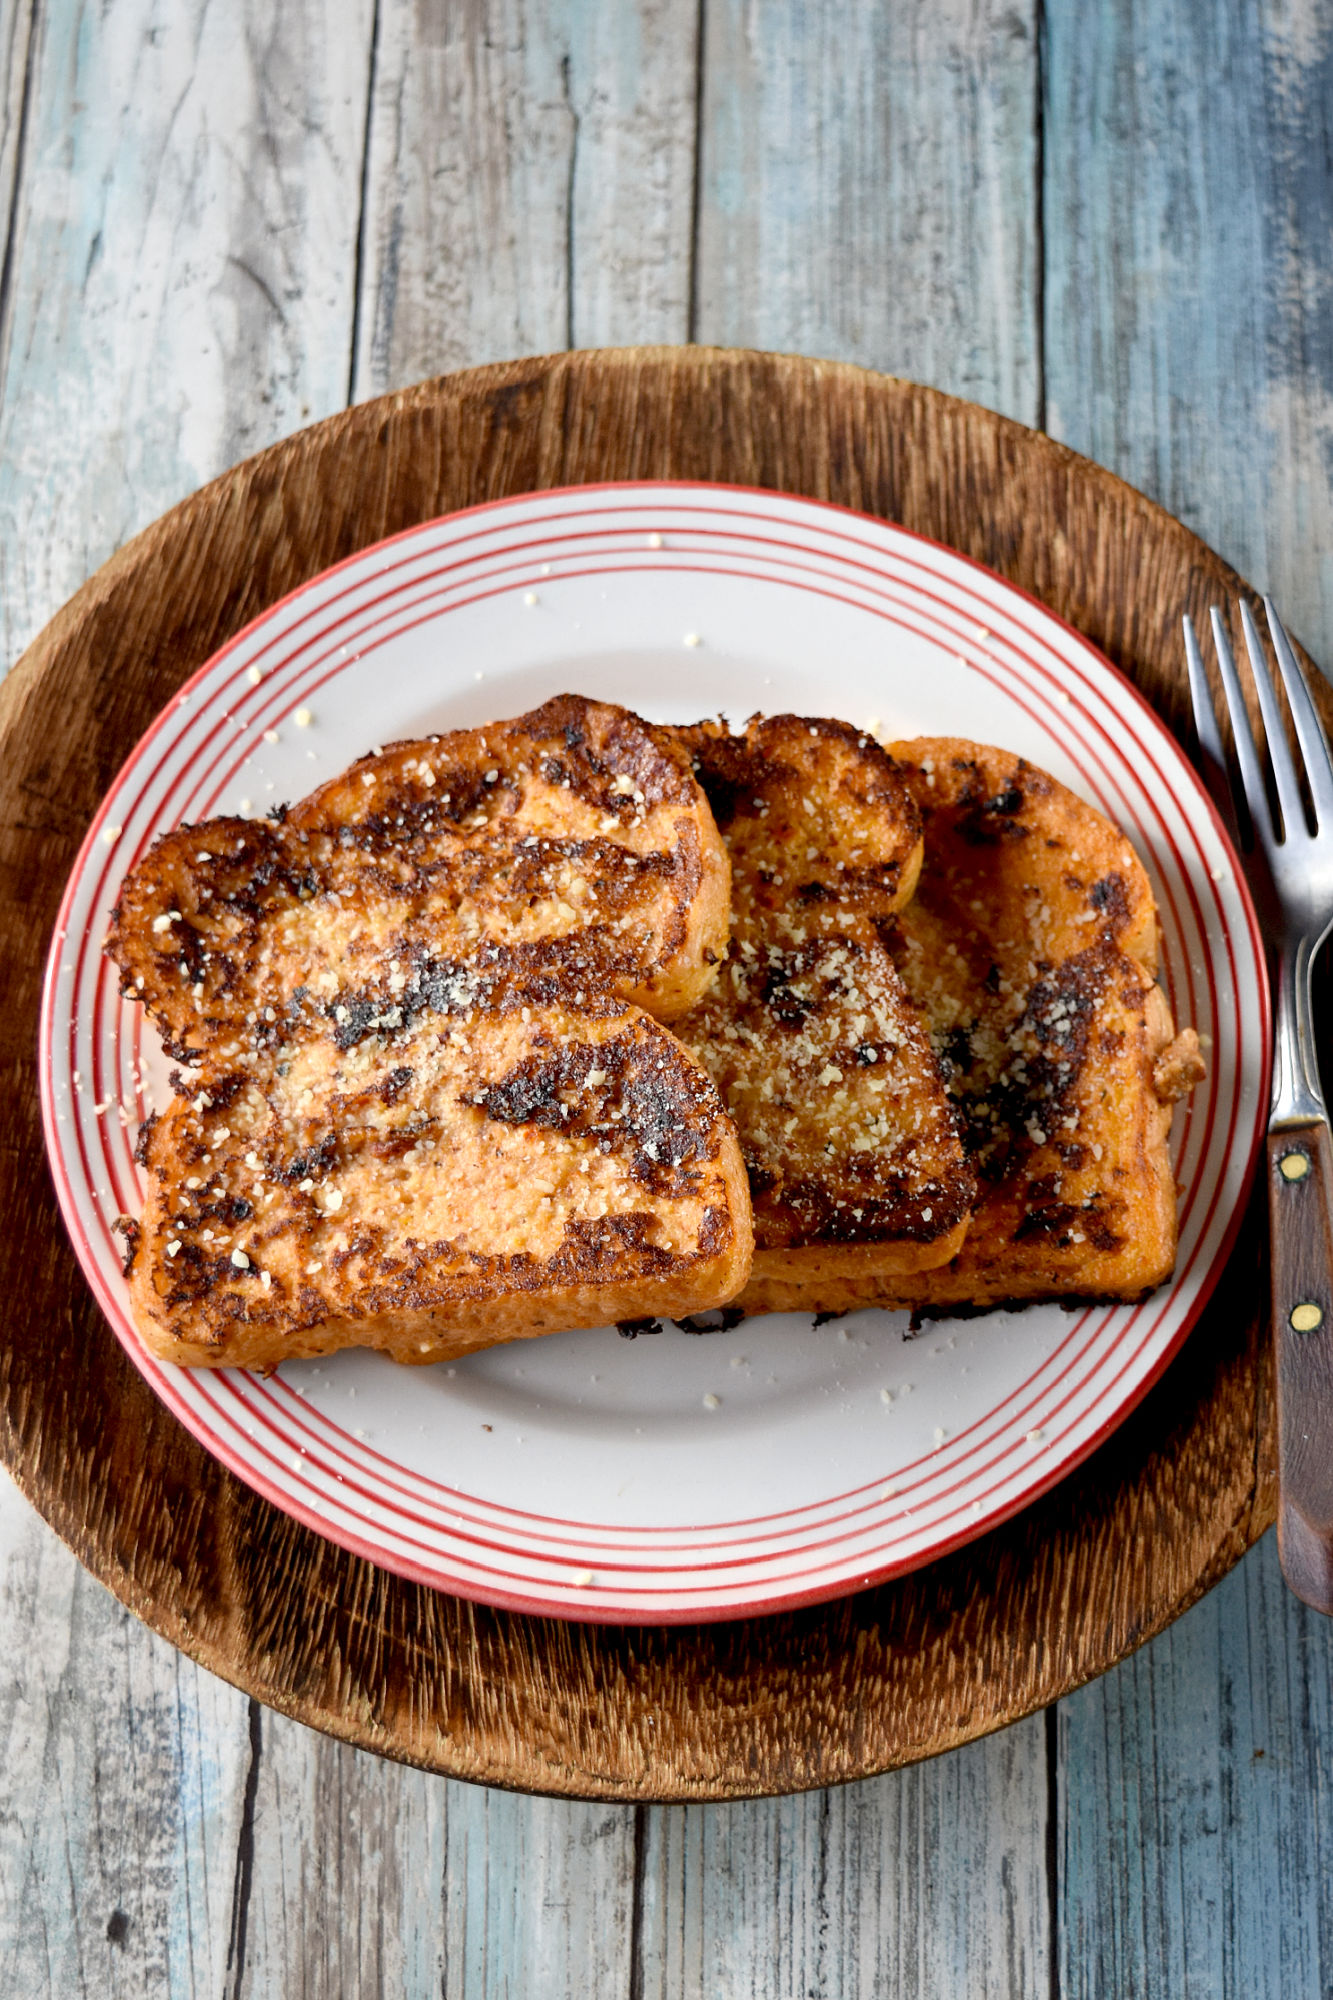 Tomato Pesto French Toast is a savory and delicious French toast with tangy tomato pesto flavor.  You can either make the pesto or use premade pesto for this fun twist on the breakfast classic. #OurFamilyTable #Frenchtoast #tomatopesto #savoryFrenchtoast